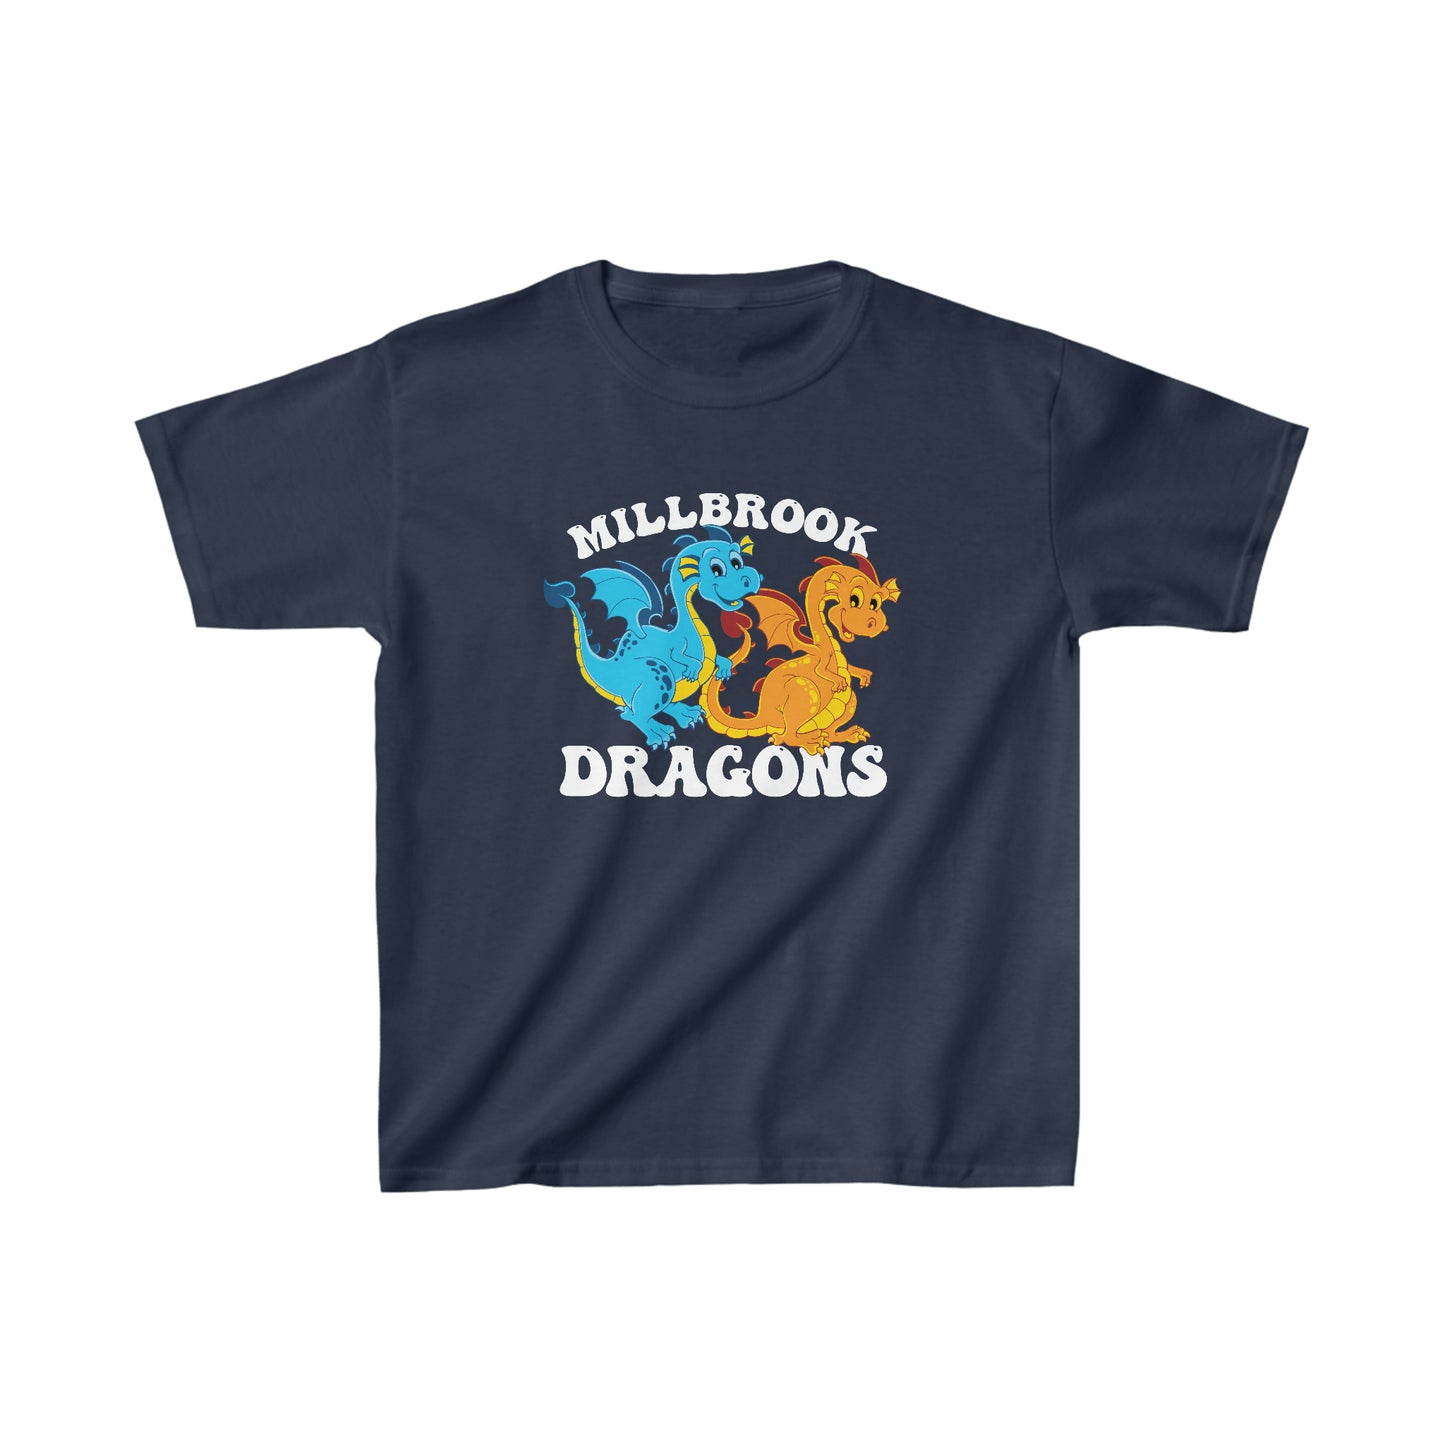 Millbrook Dragons Tee - Youth